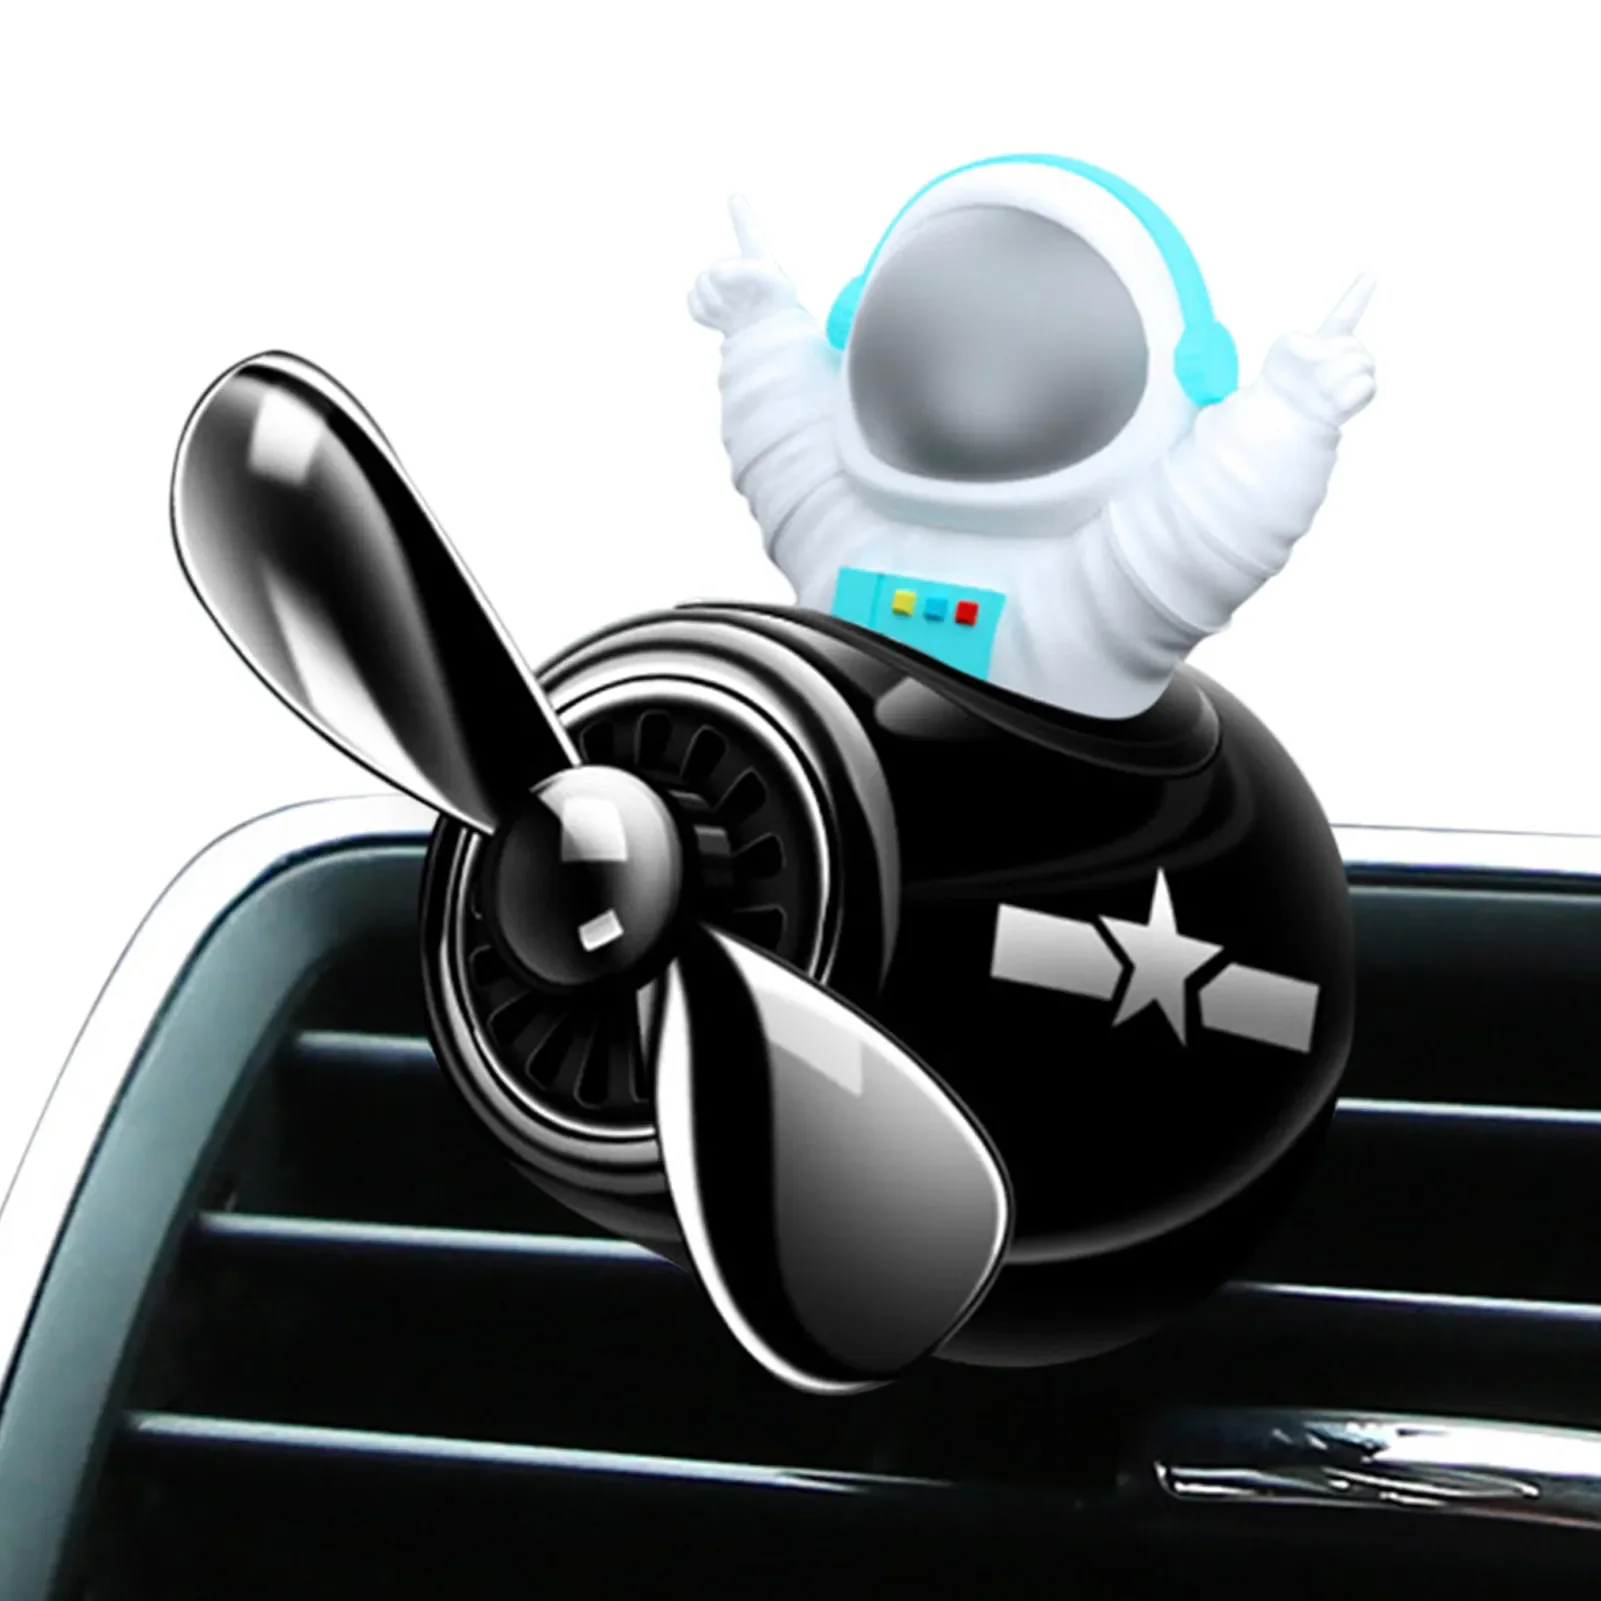 

Air Fresher Spacemen Car Aromatherapy Vent Clips Cute Car Diffuser Rotating Propeller Air Outlet Freshener Perfume Clip Auto